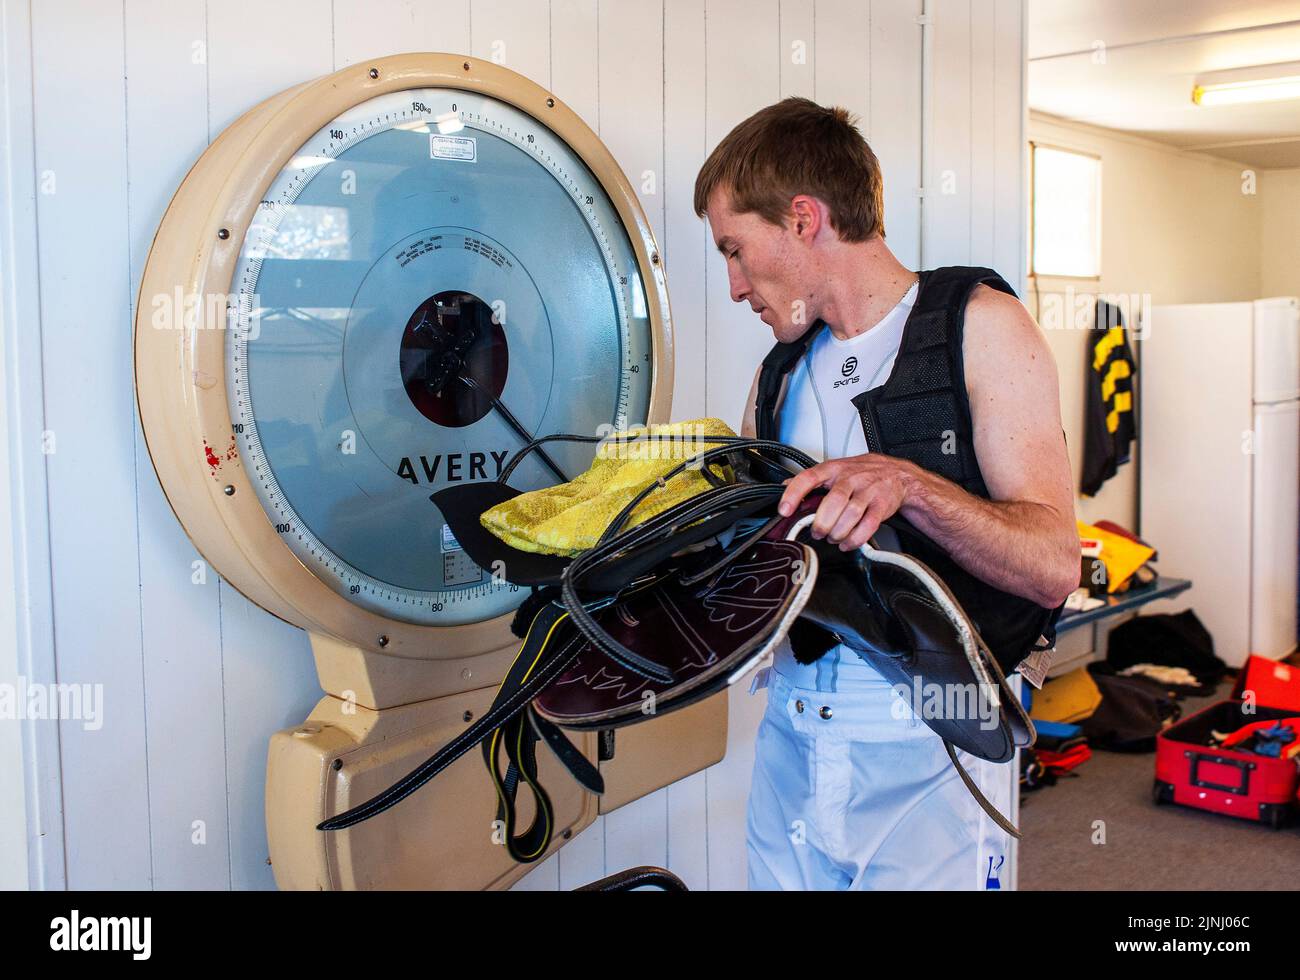 A jockey with saddle undergoes a weigh in before a race at the Kalgoorlie-Boulder Racing Club in Western Australia Stock Photo